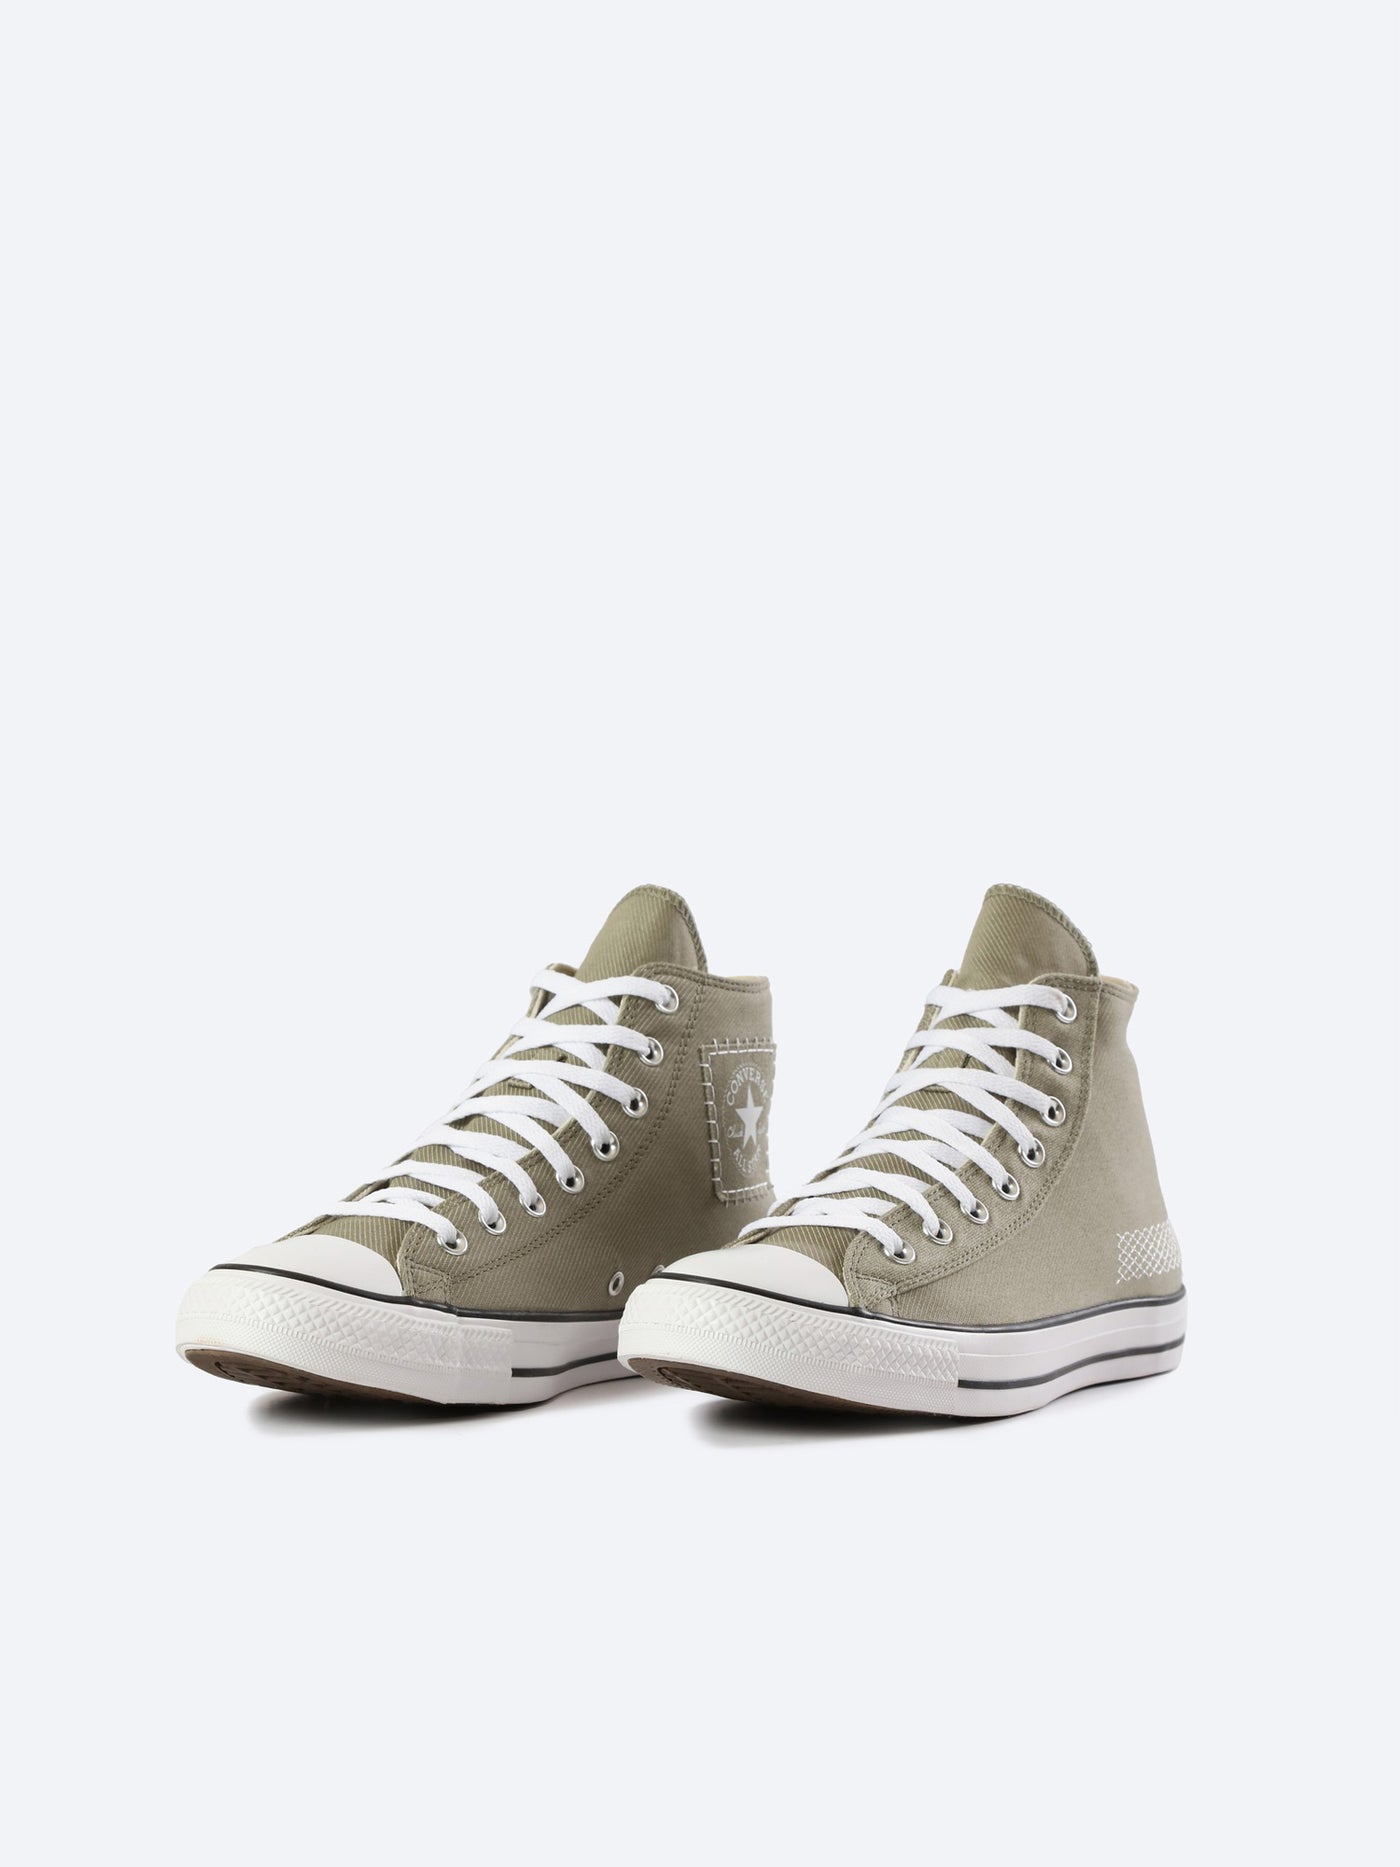 Sneakers - Chuck Taylor All Star - Denim Patchwork – TFK